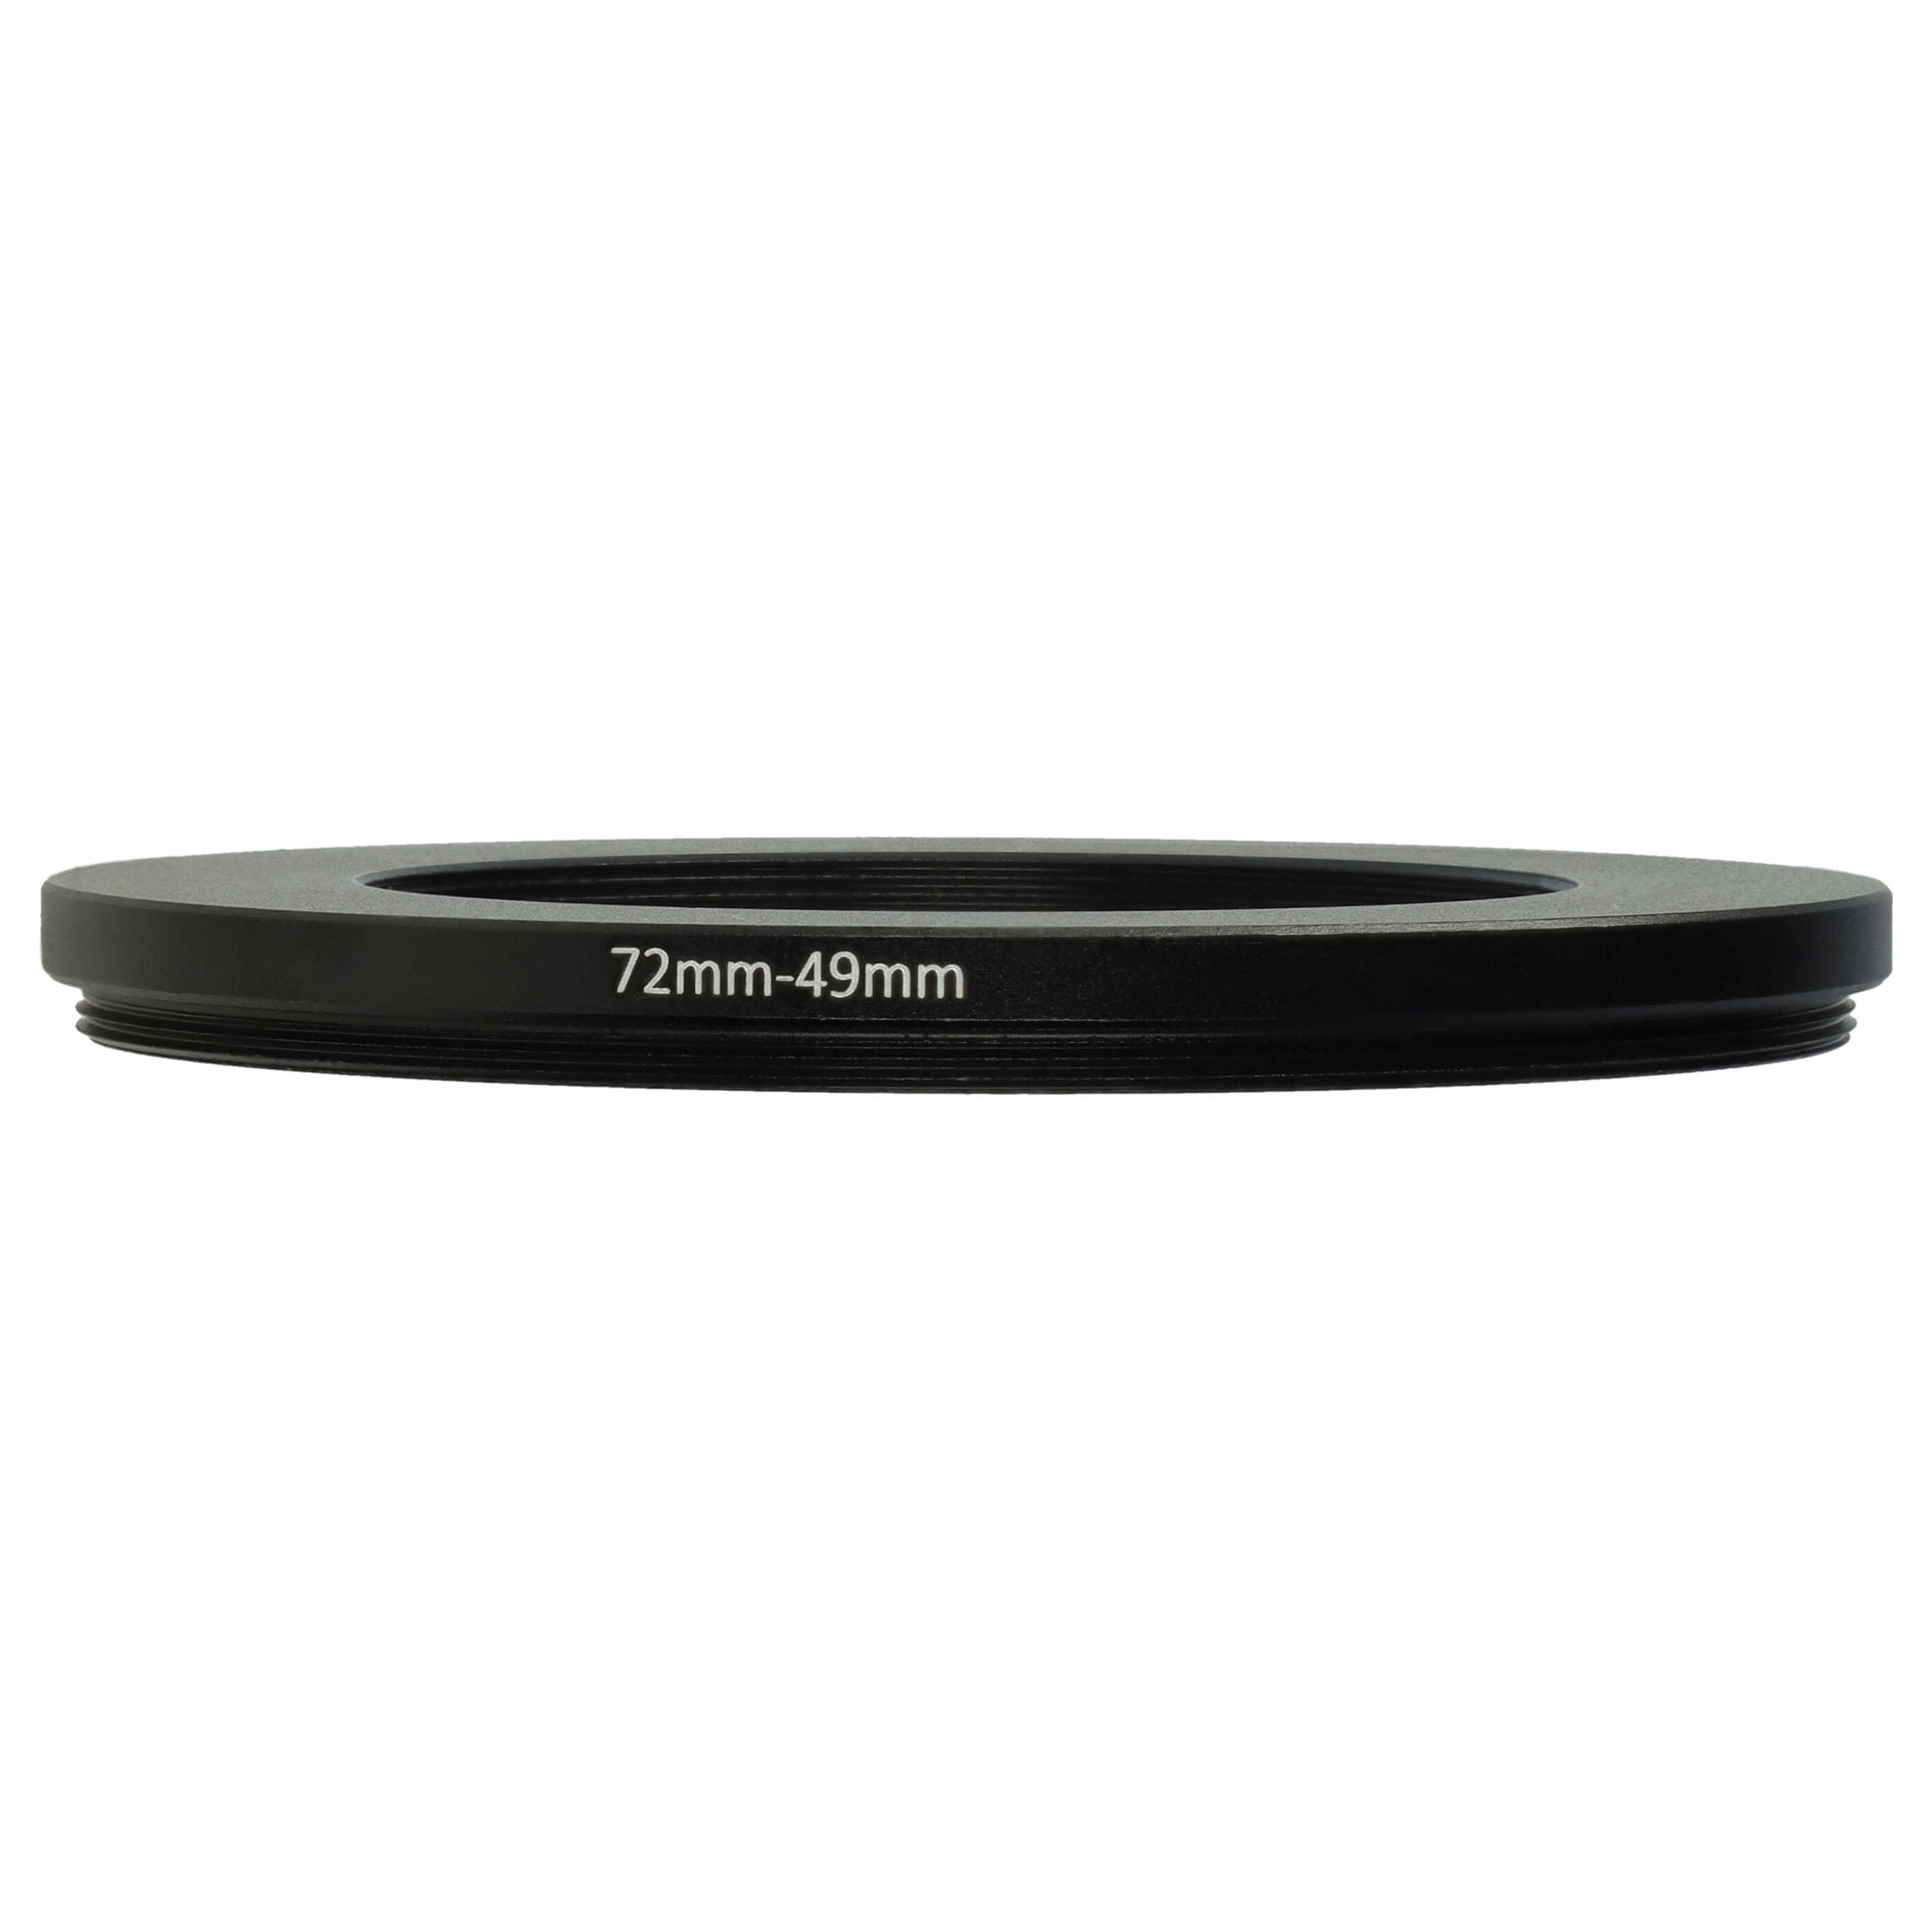 Step-Down Ring Adapter from 72 mm to 49 mm for various Camera Lenses